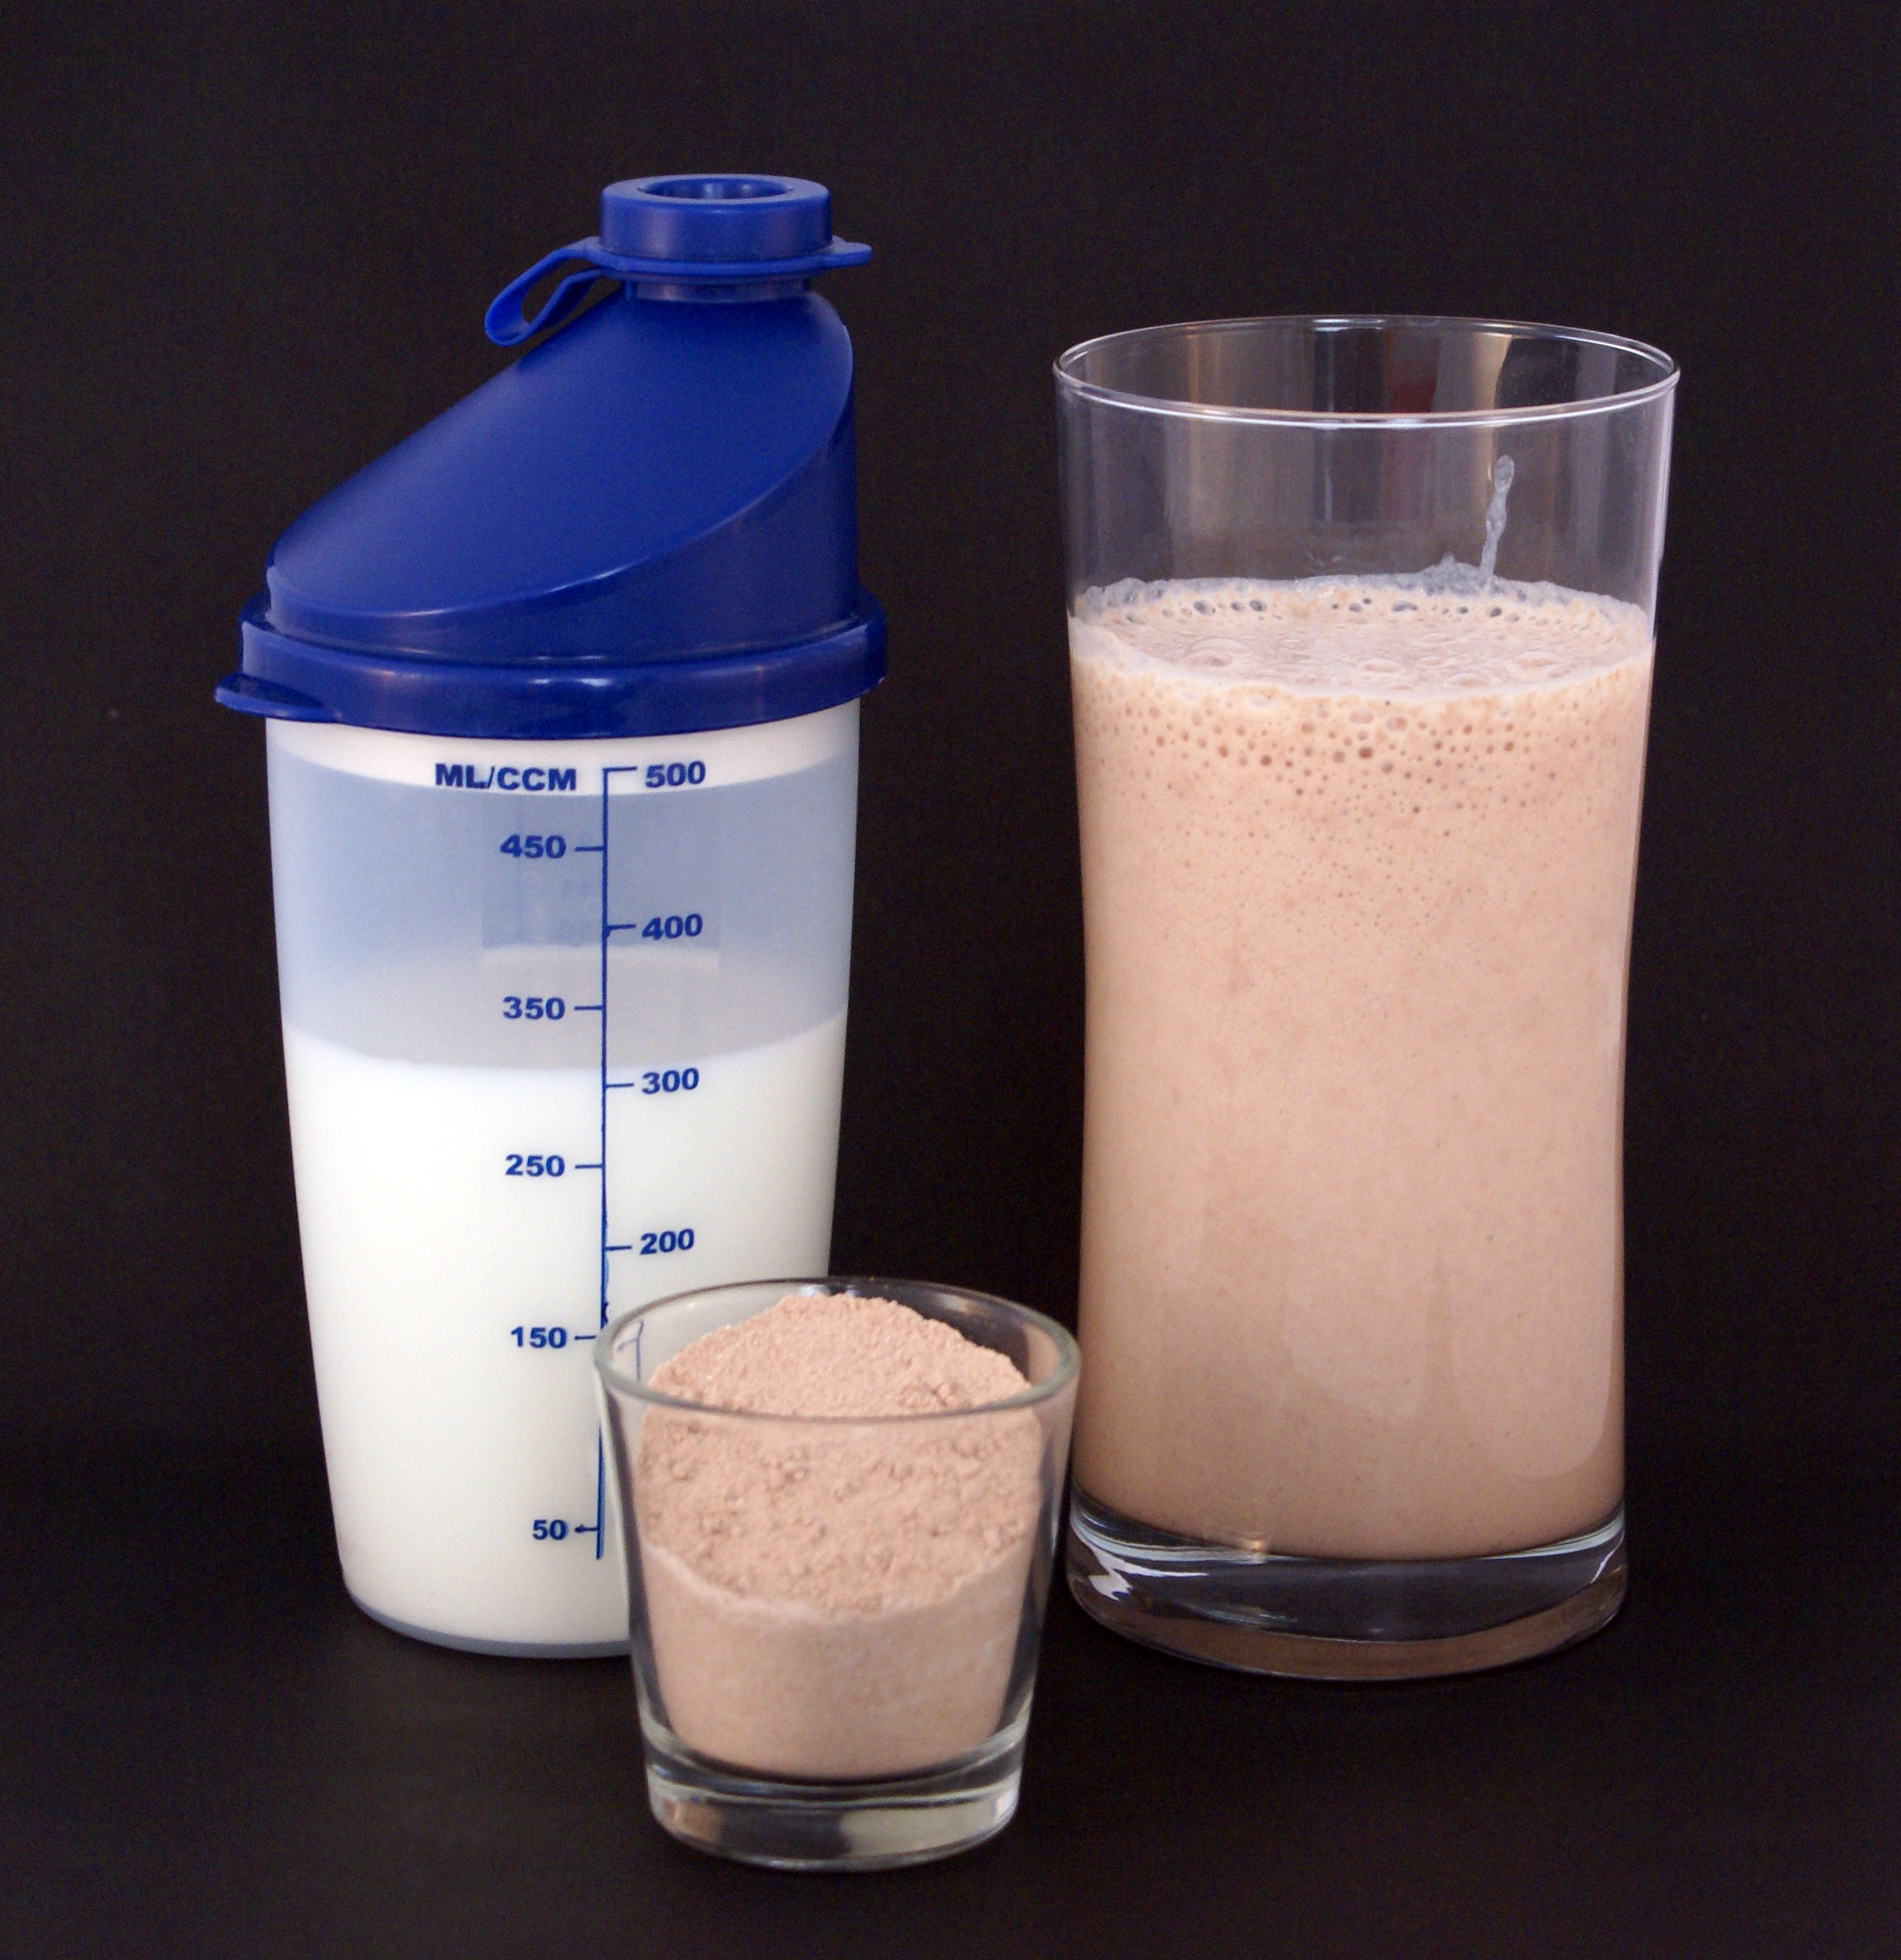 Protein drinks used to increase muscle mass.